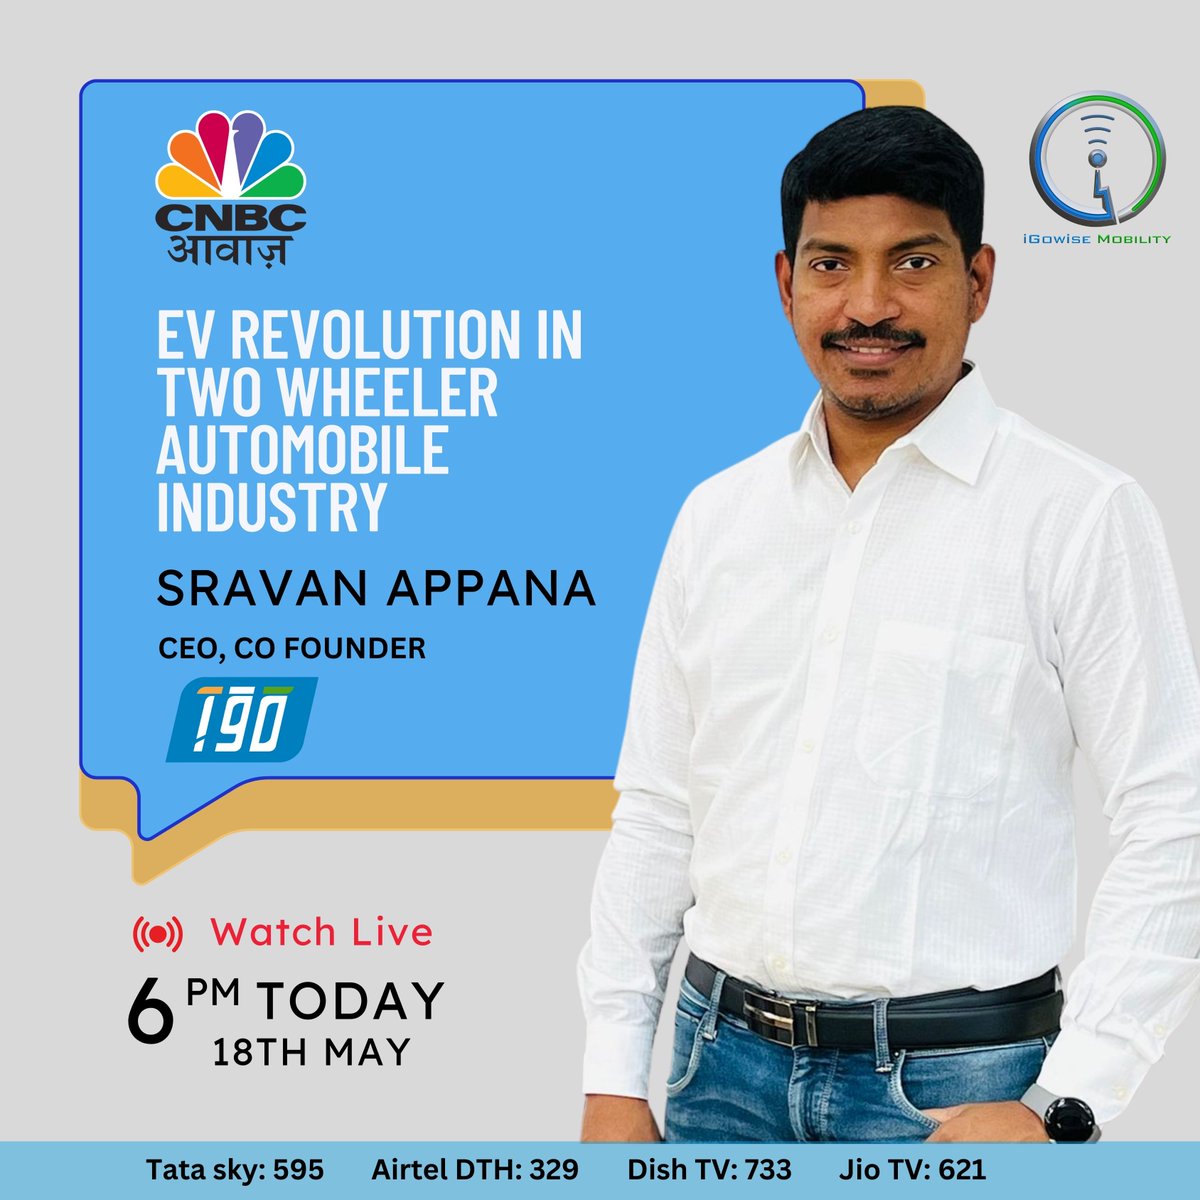 Revolutionizing the Roads: Join me as I discuss the EV Evolution in the Two-Wheeler Automobile space on CNBC Aawaz!

Catch us live and let's ride the future together!
.
.
.
#EVRevolution #TwoWheelerIndustry #FutureOfMobility #igowisemobility #cnbc #cnbcawaaz #twinwheeltech